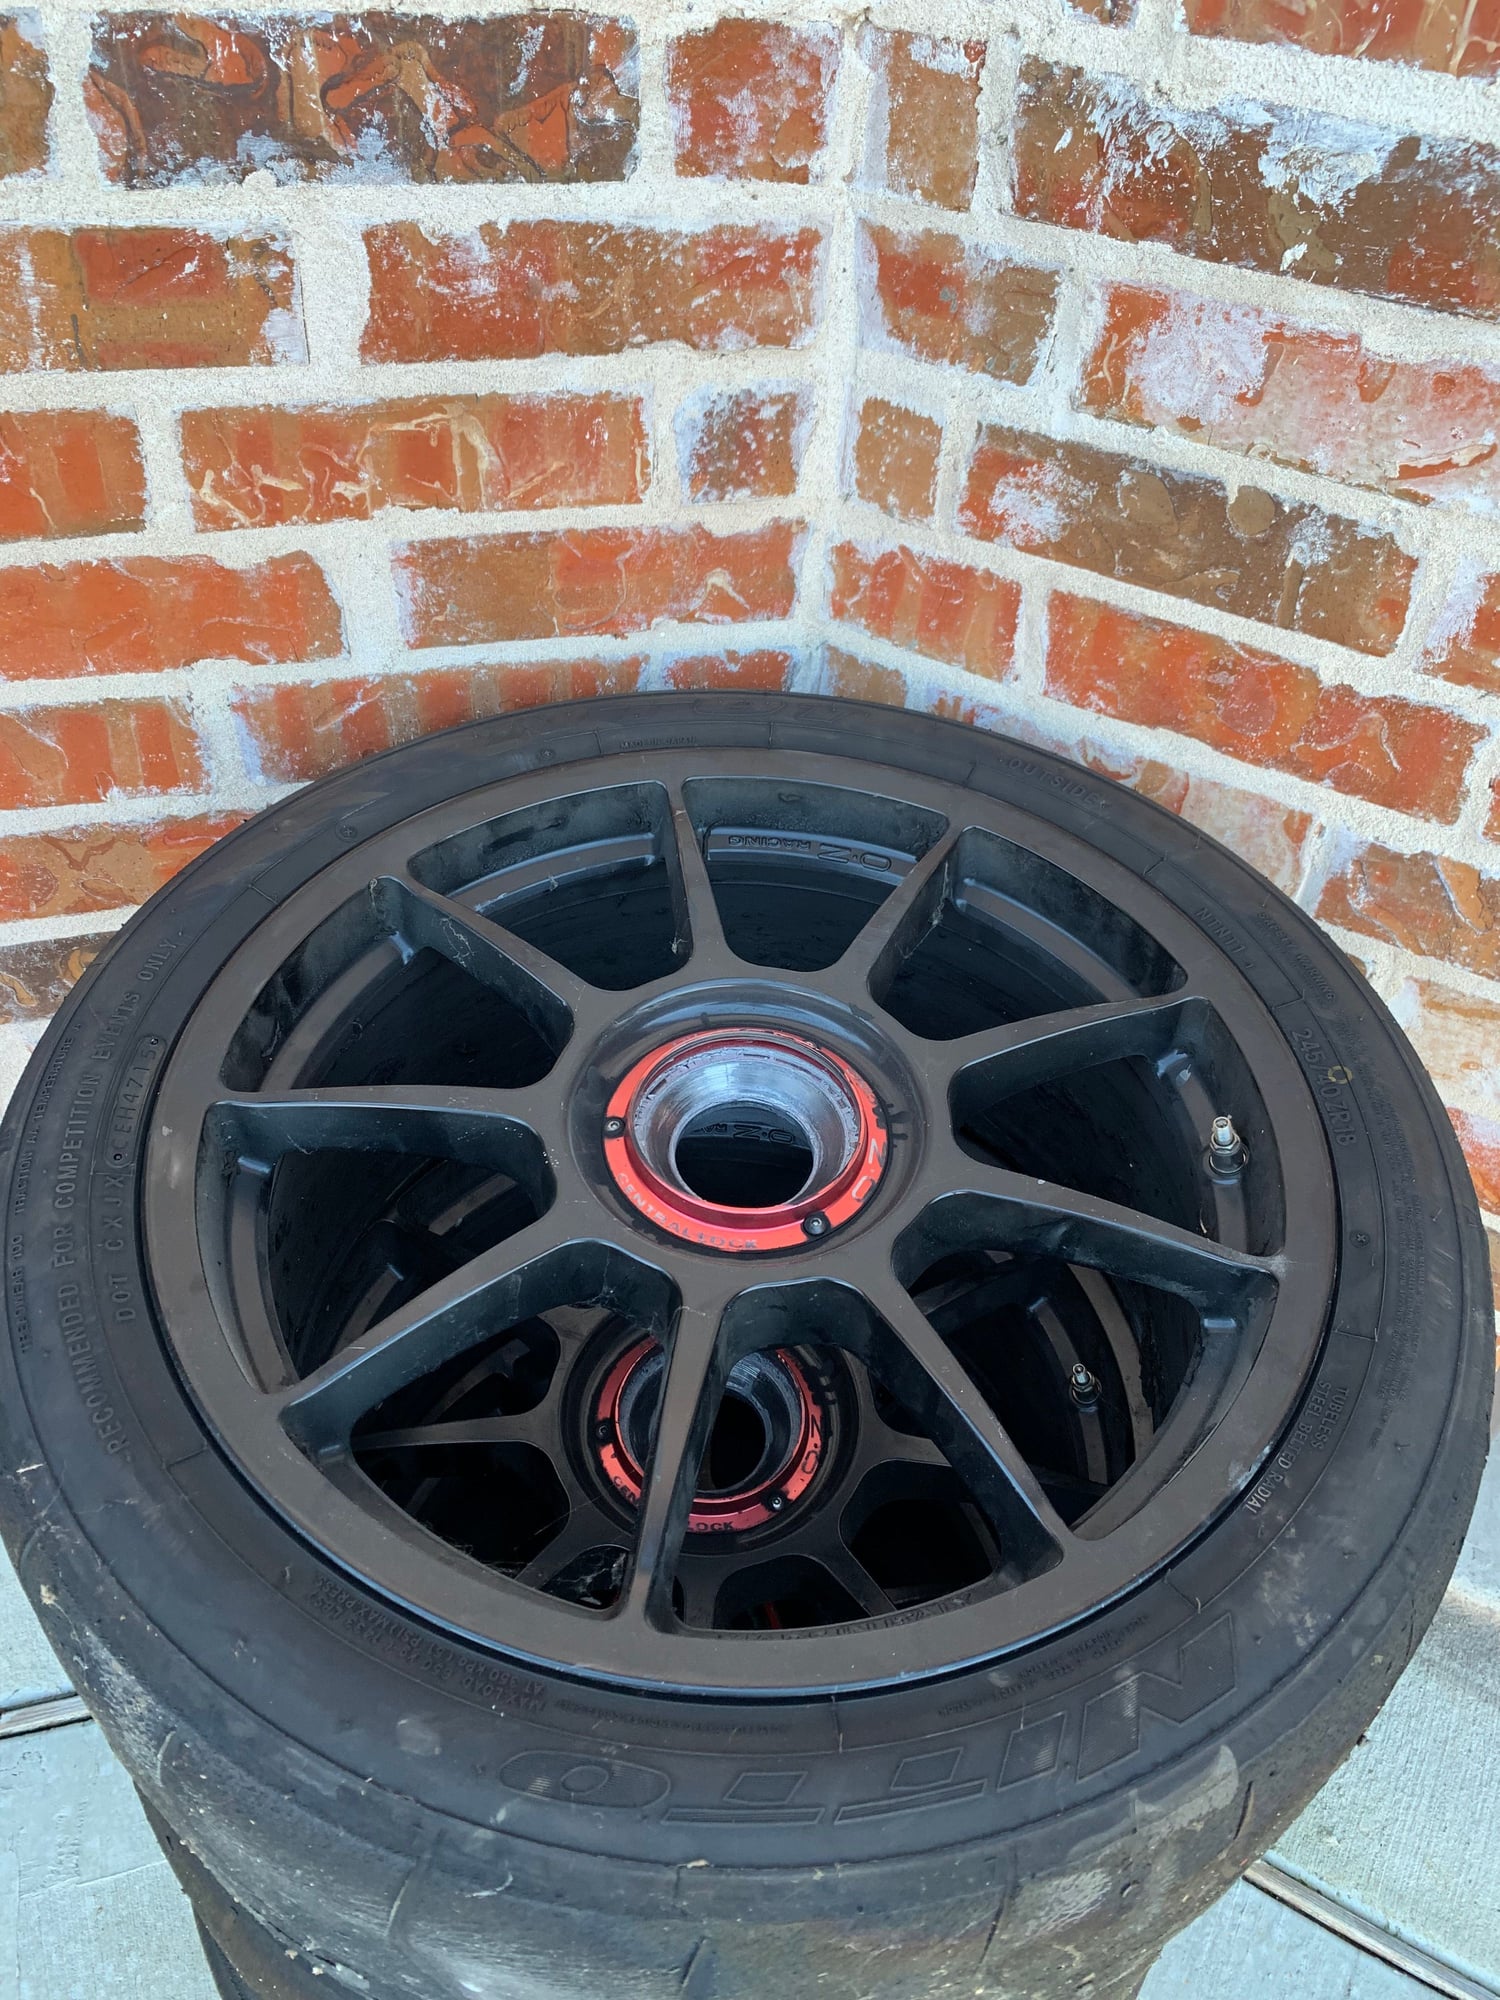 Wheels and Tires/Axles - 997.2 CL 18" GT3 OZ Wheels and NT01 Tires - Used - 2010 to 2011 Porsche GT3 - Fairview, TX 75069, United States